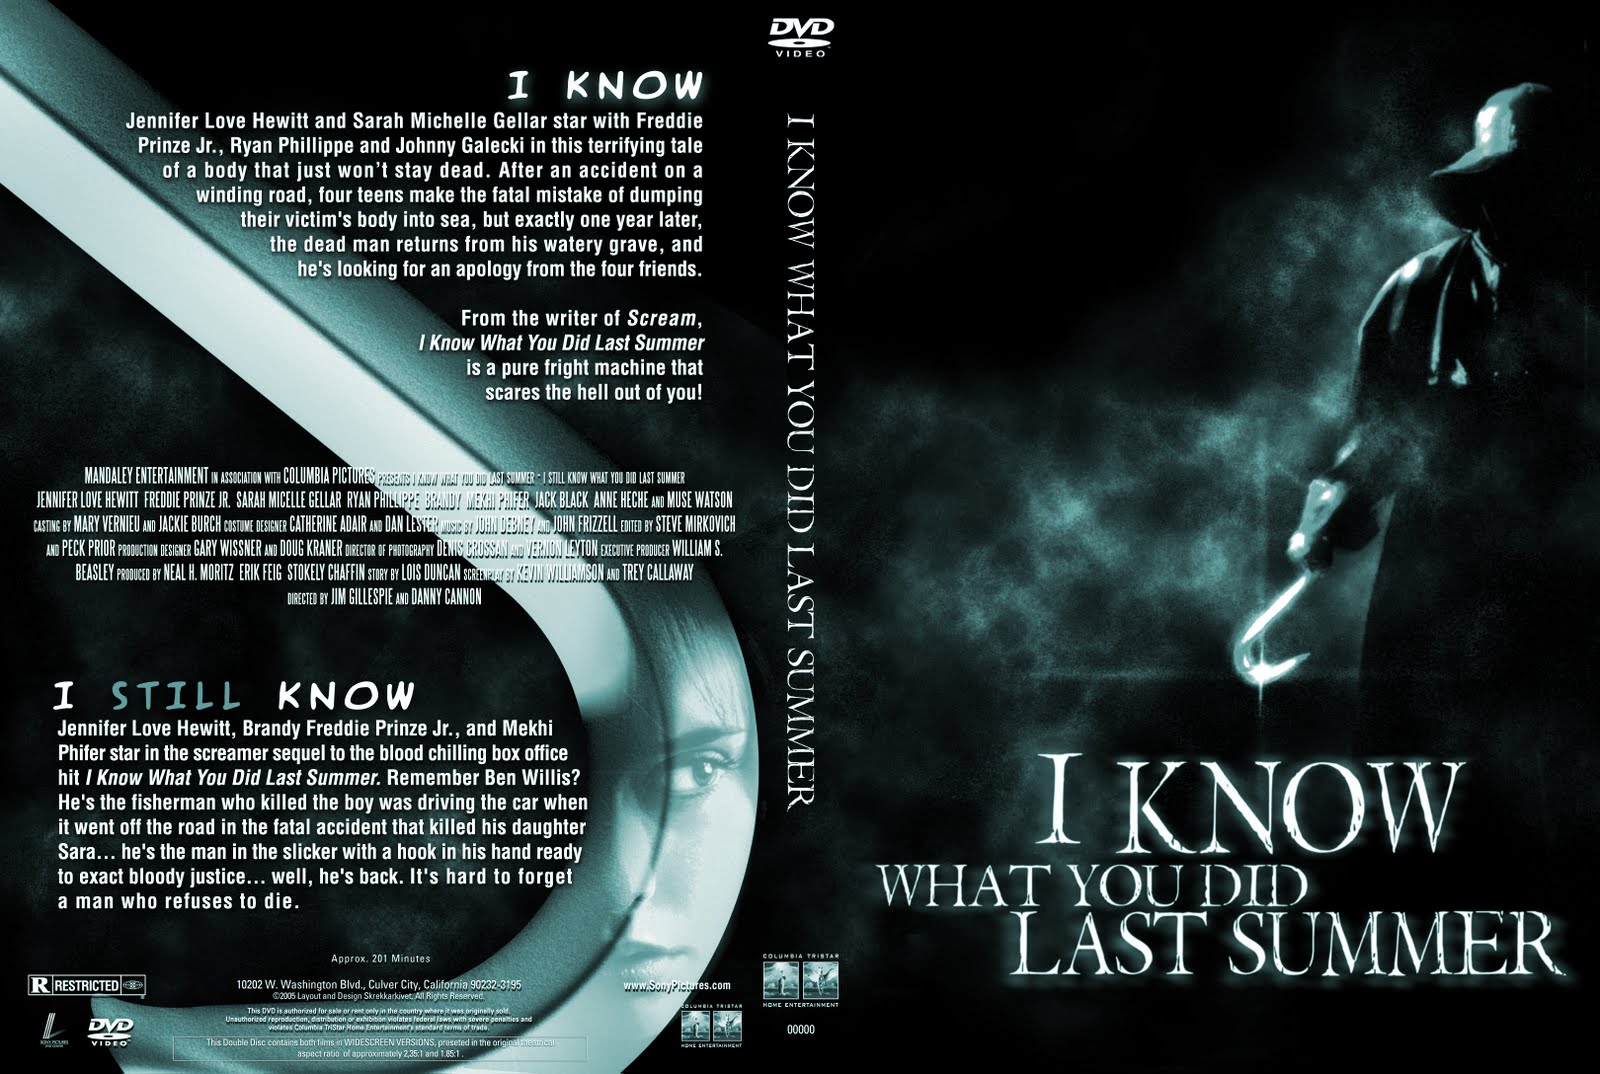 What did the do last year. I know what you did last Summer. I know what you did. I know what you did last Summer poster.